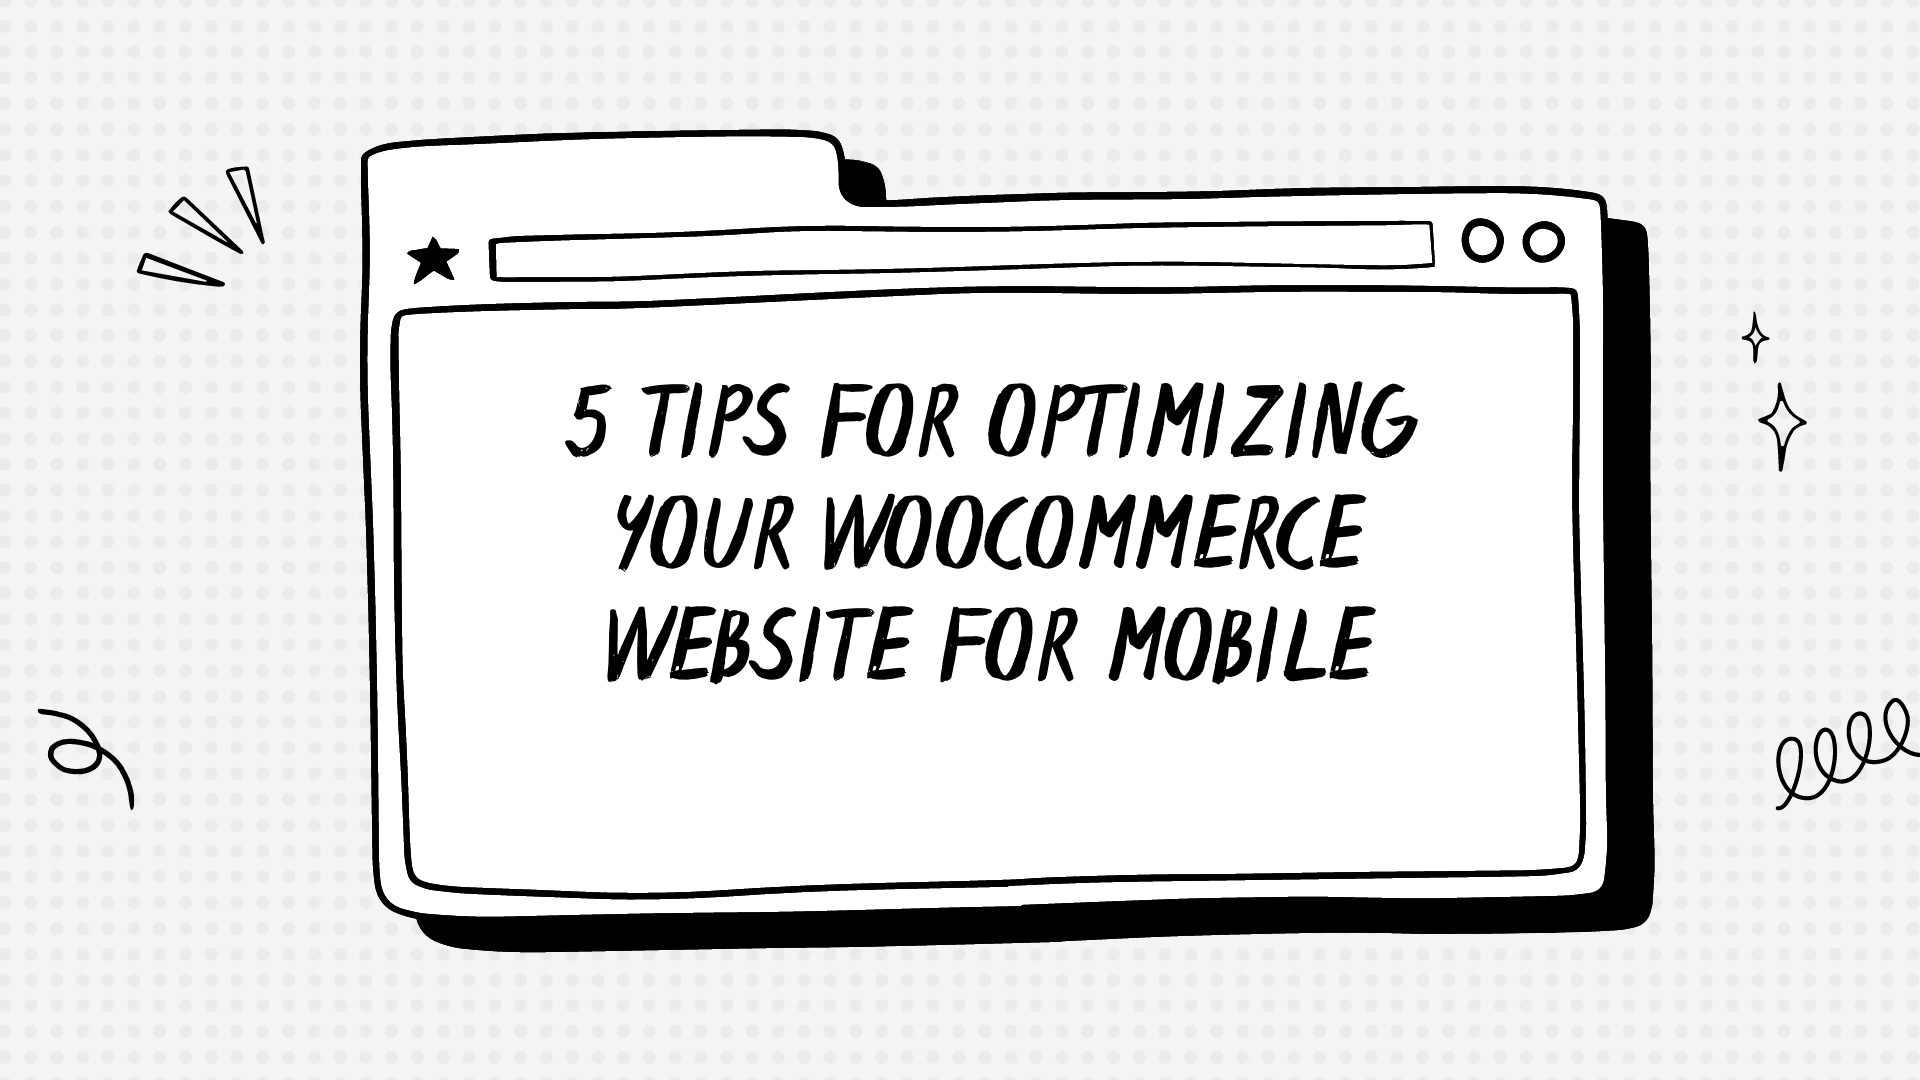 5 tips for optimizing your WooCommerce website for mobile